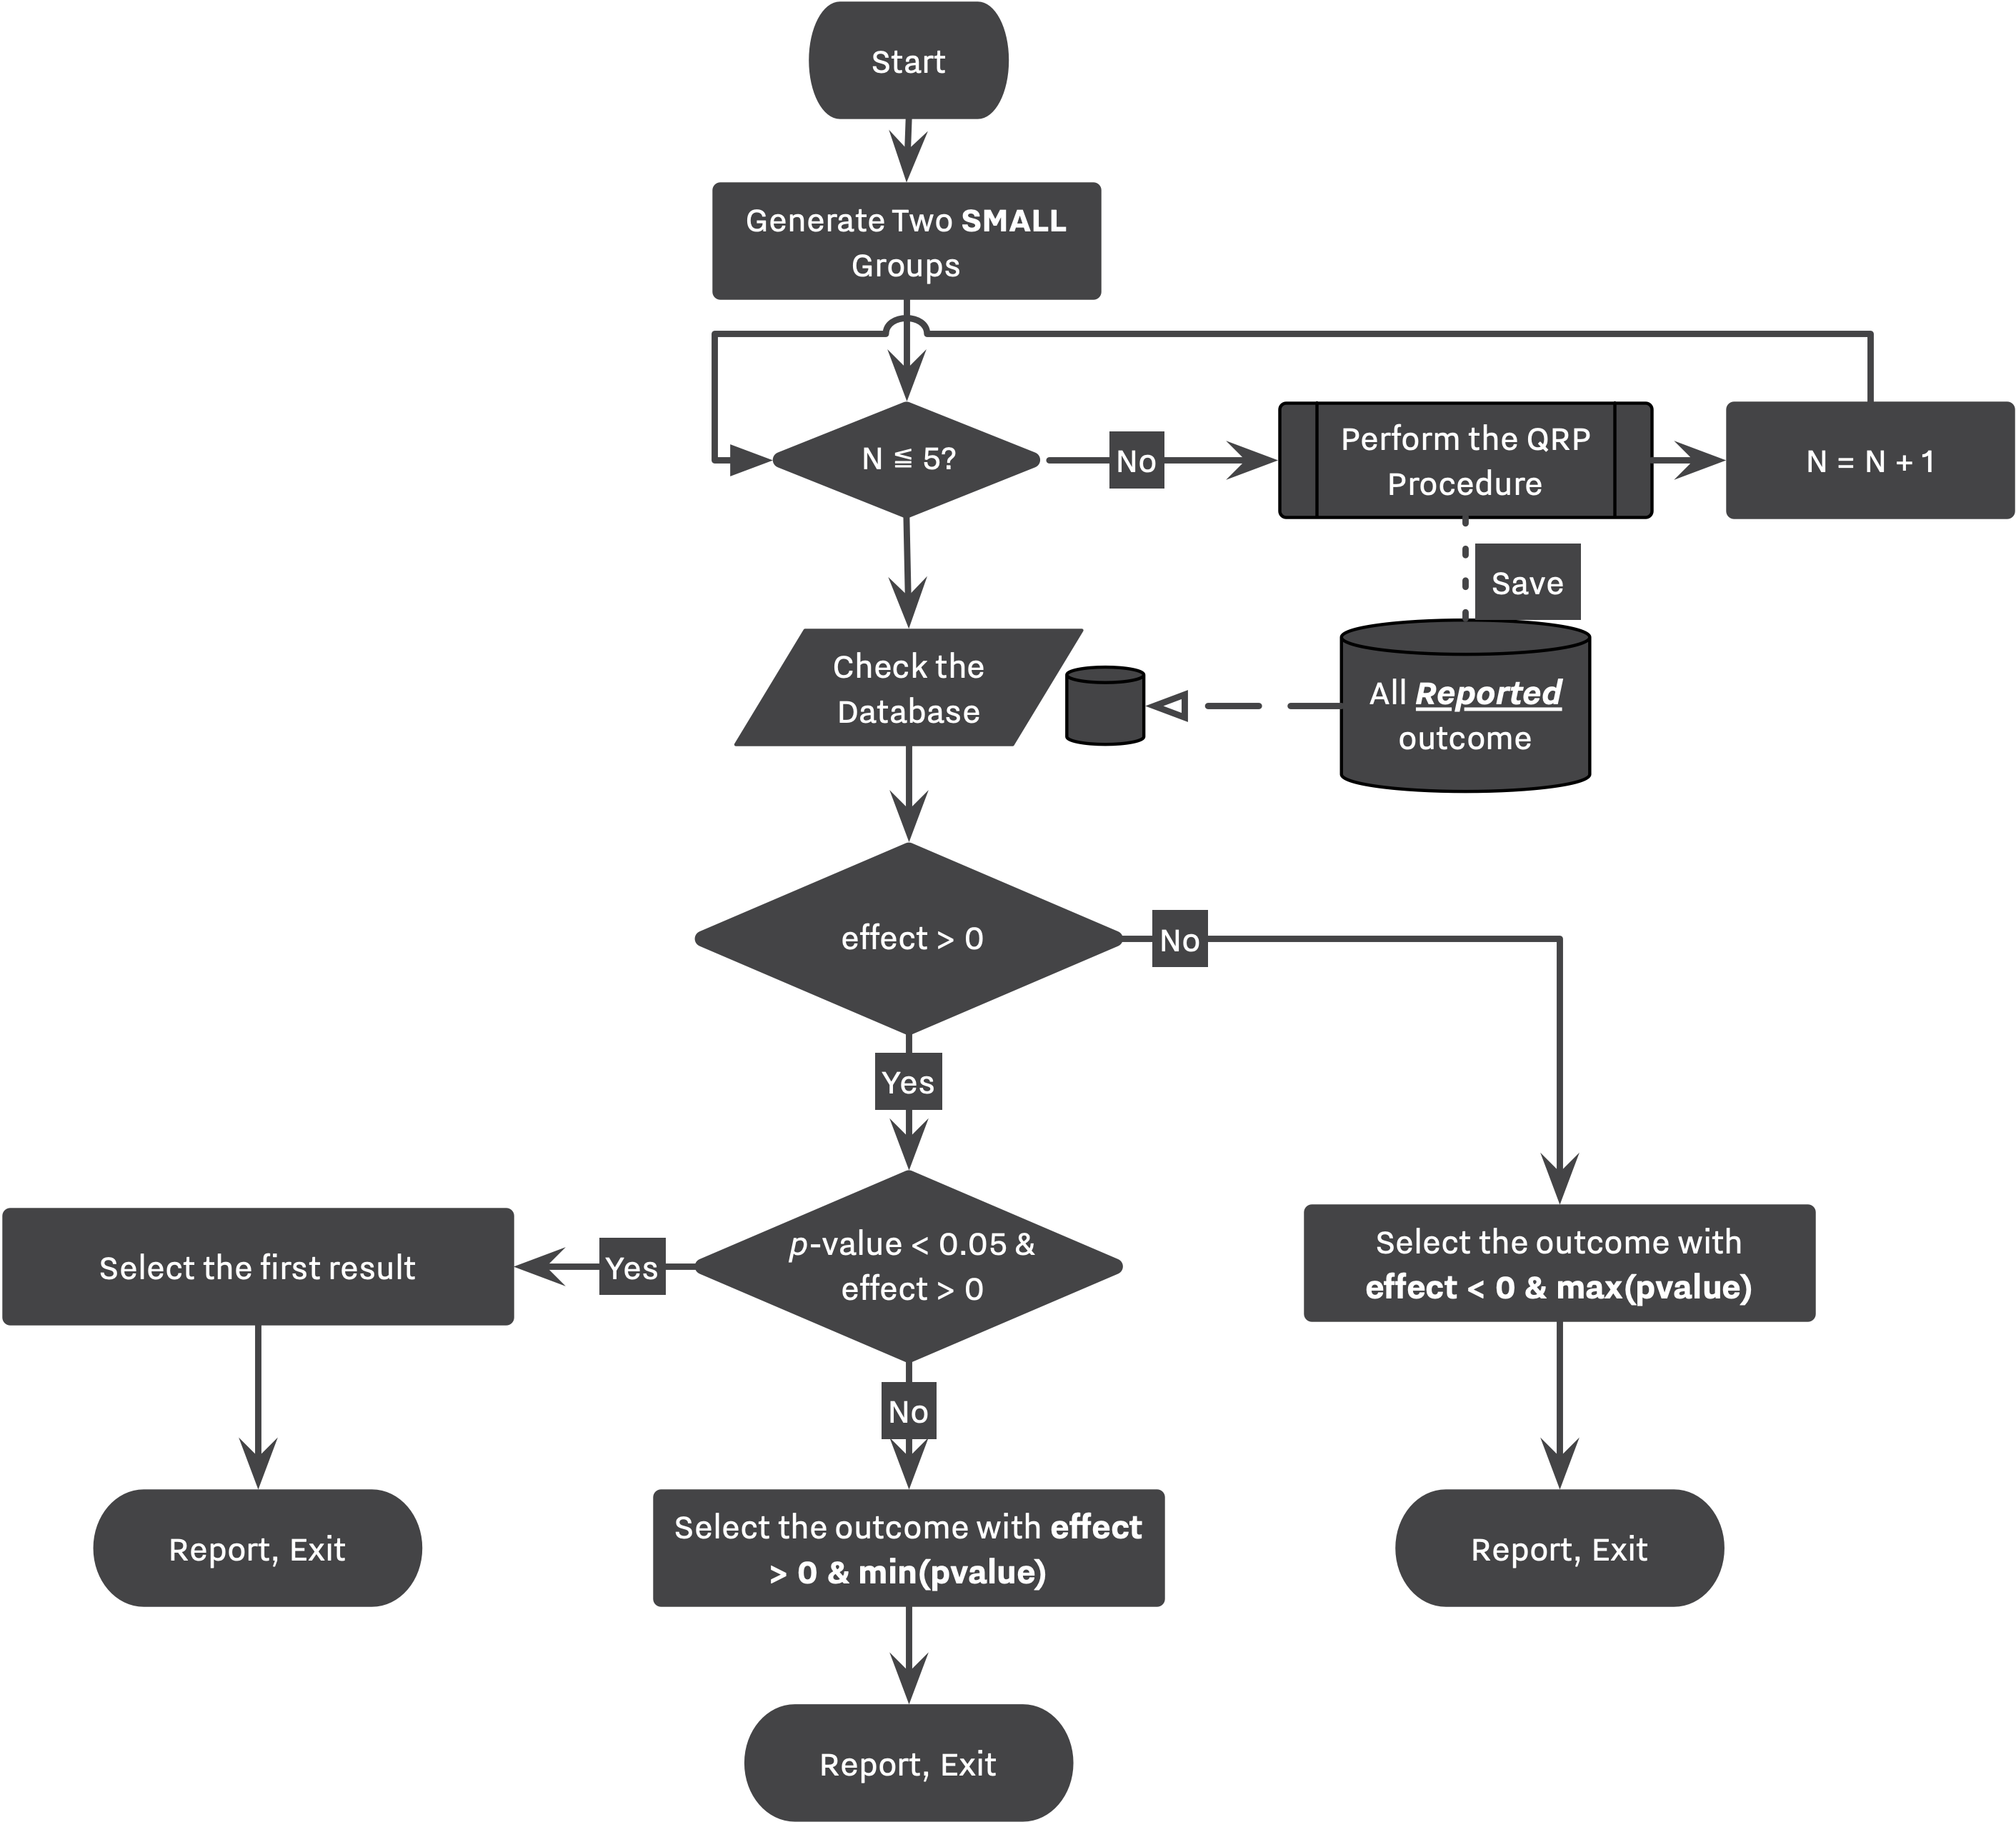 Flowchart describing Strategy 3, and 4. In the case of Strategy 3, the simulation skips the QRP Procedure but still collects the final outcome from each replication attempts.